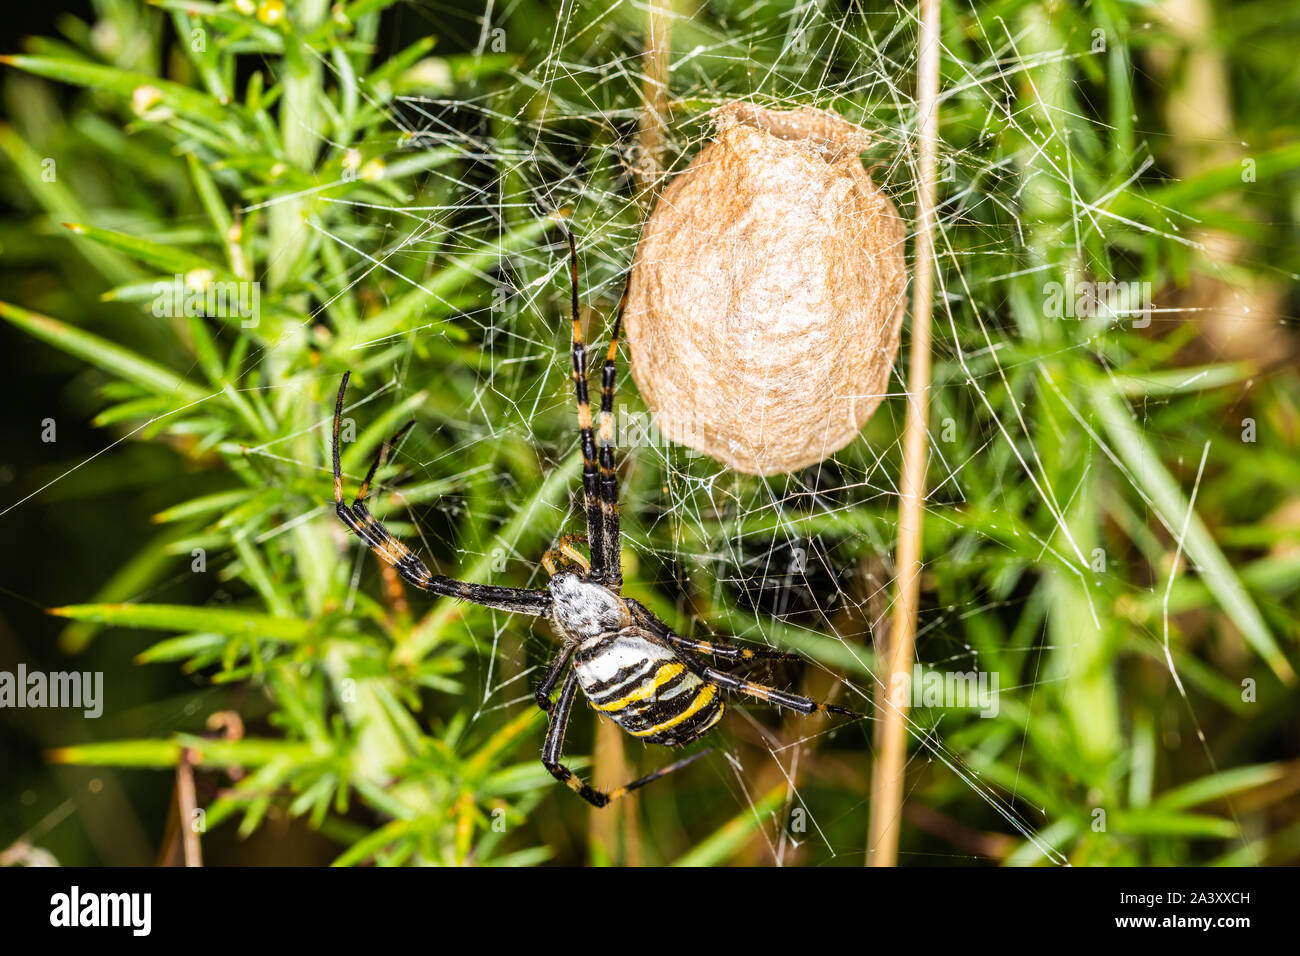 Colour wildlife photograph of Wasp spider (Argiope bruennichi) with egg sac. Stock Photo